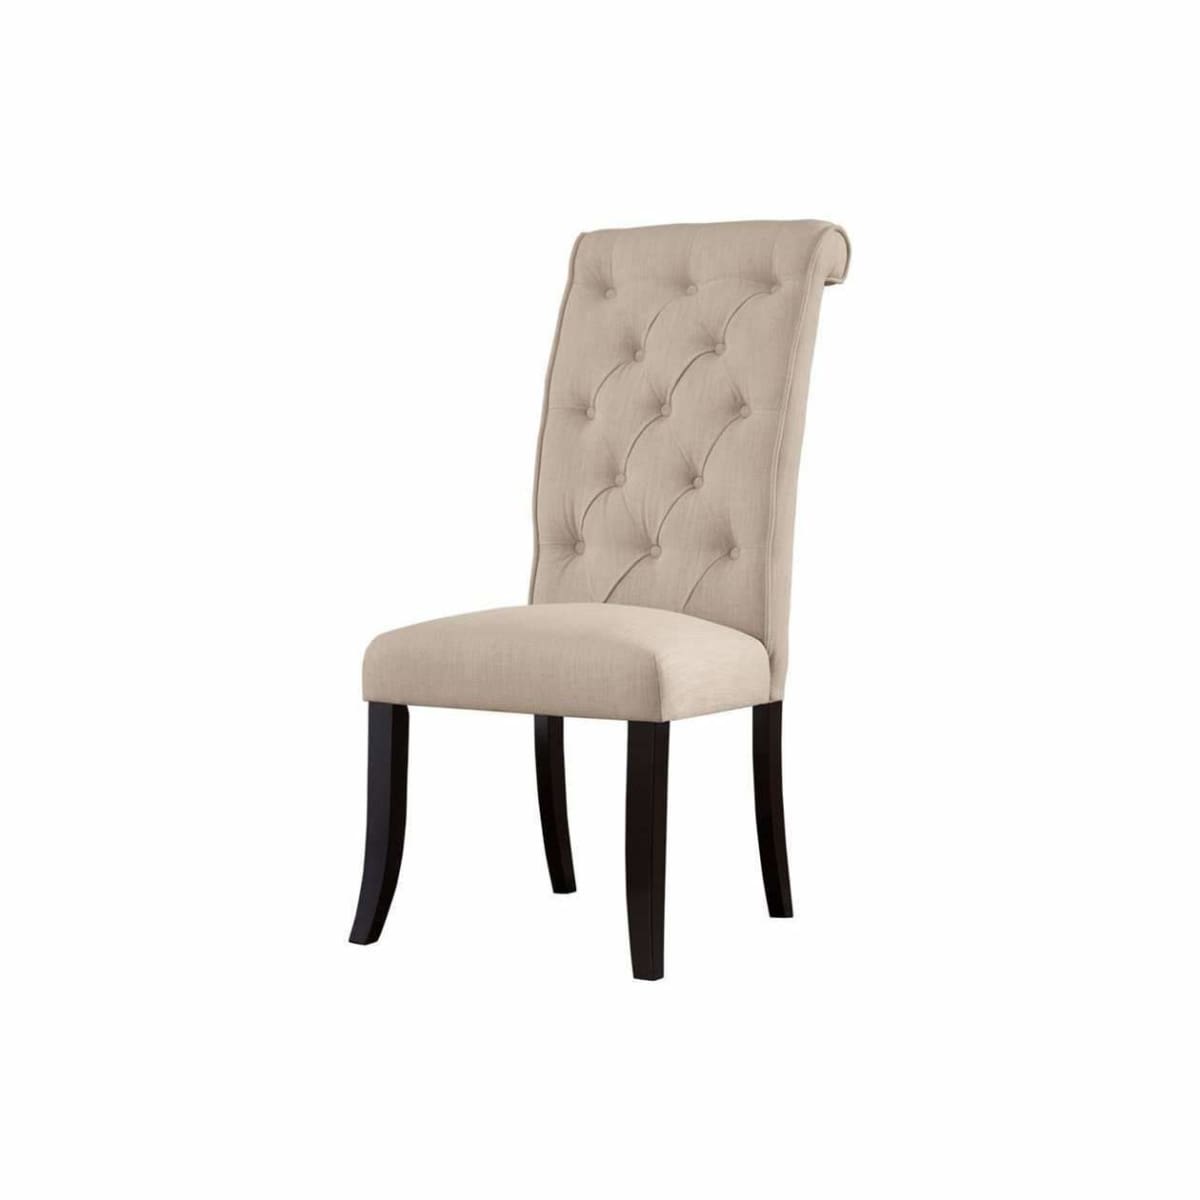 Tripton Dining Room Linen Chair - dining chairs